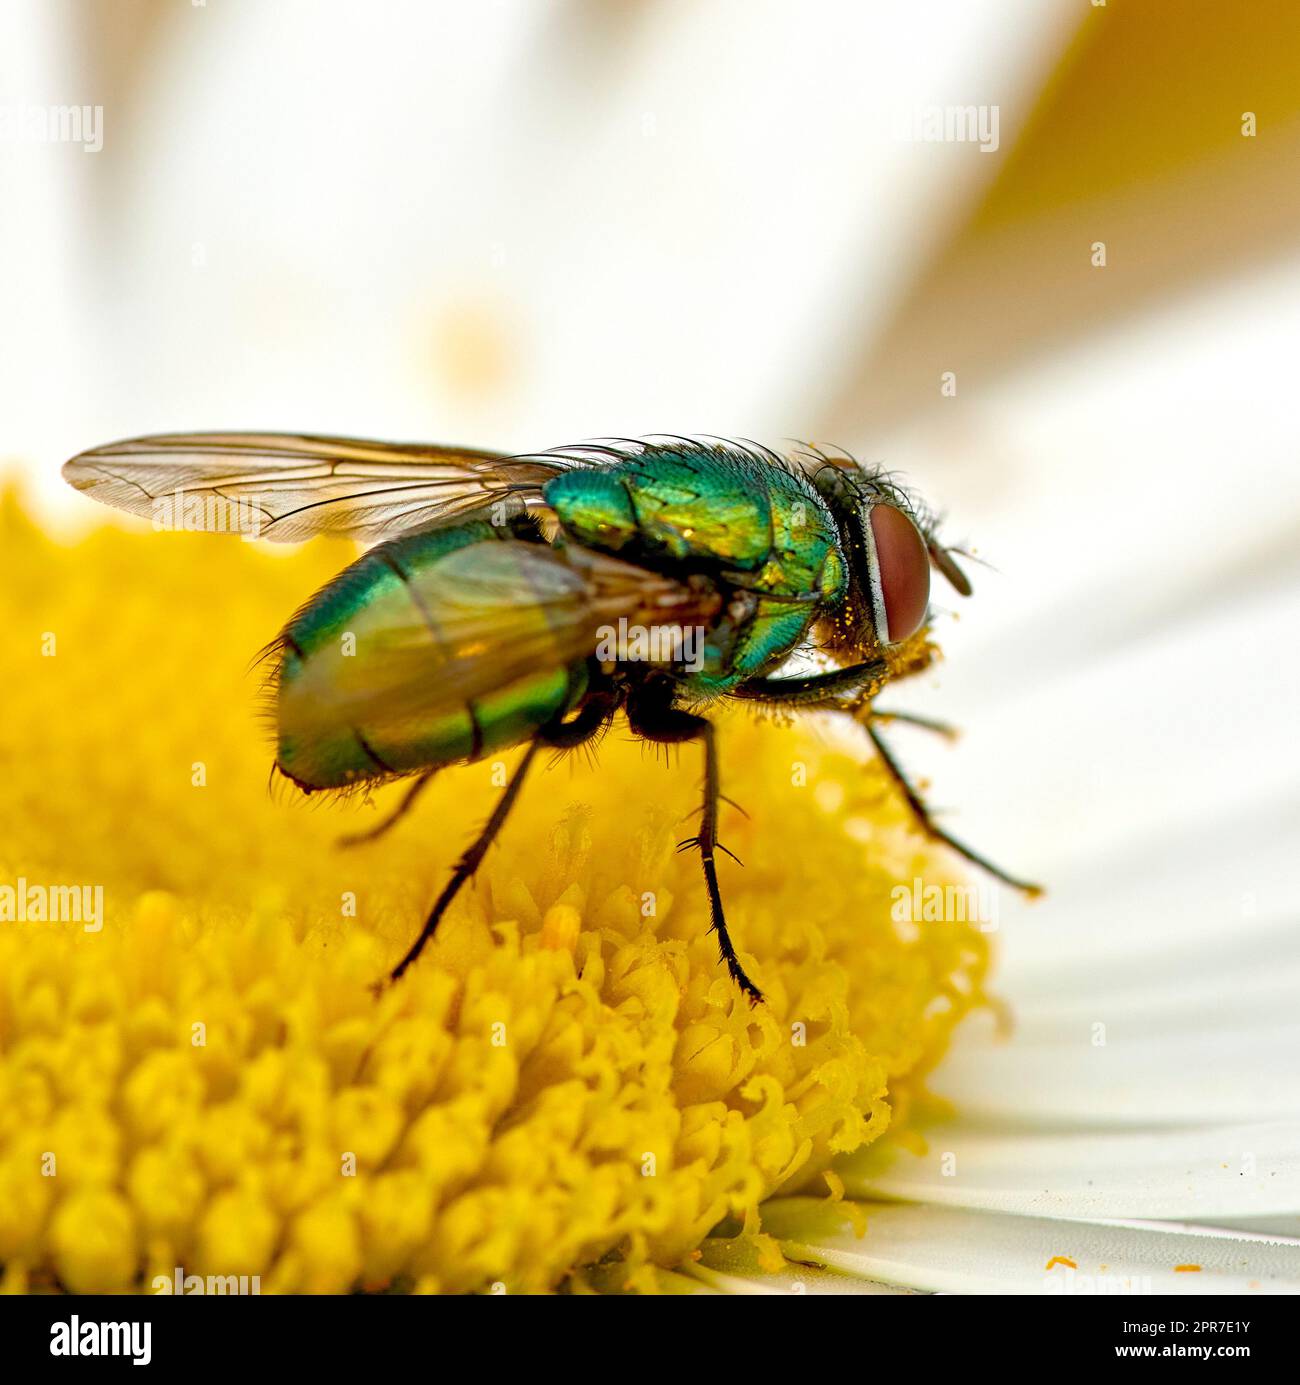 Green bottle fly feeds and relax on a white daisy after a long day of flying. Colourful blue blowfly collect nectar and pollinates a flower. Closeup of a hairy common fly on a bright yellow blossom. Stock Photo